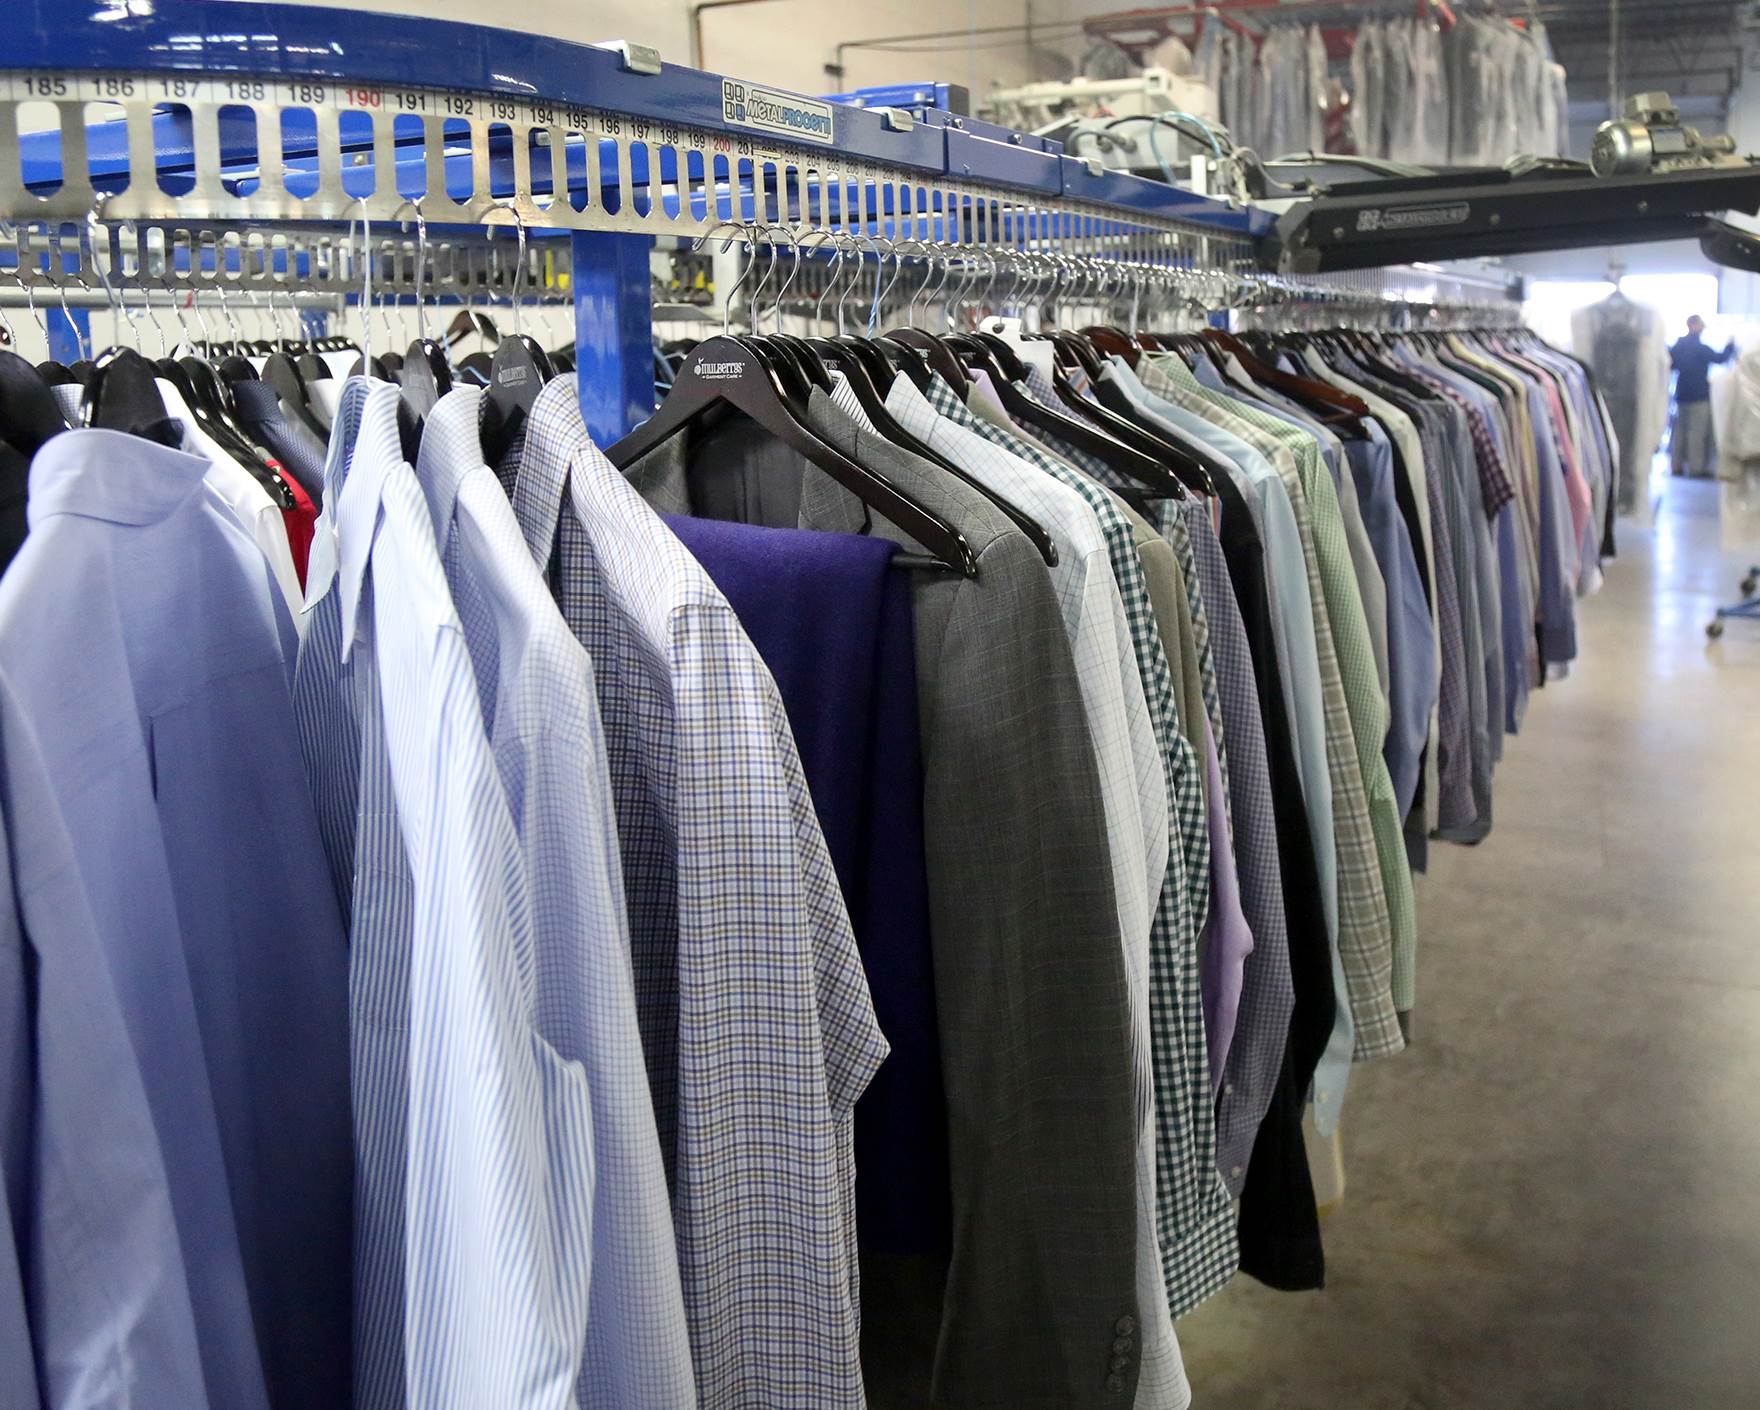 Cloth Washing Service in Gurgaon  Astordrycleaners offers Dry cleaning & Laundry services at doorstep in gurgaon and Faridabad and dirty clothes to washing them as per the fabric needs and then ironing them.Visit Now : https://bit.ly/2SztkBx by soniyasharma